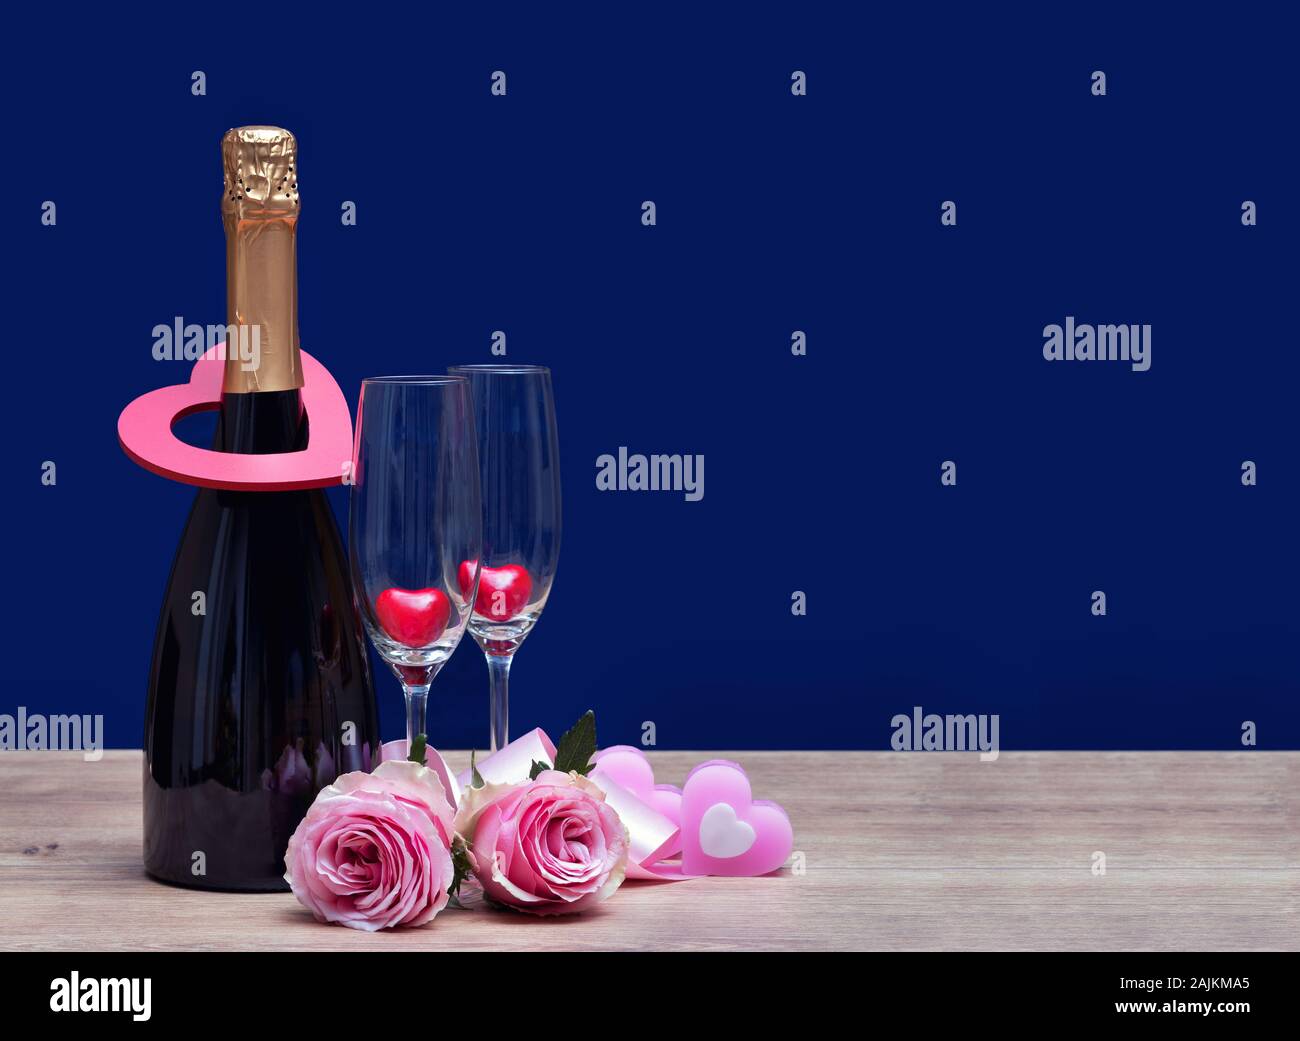 Valentines day background with champagne bottle and two glasses with heart shape two pink roses. International Womens Day March 8 concept. Stock Photo